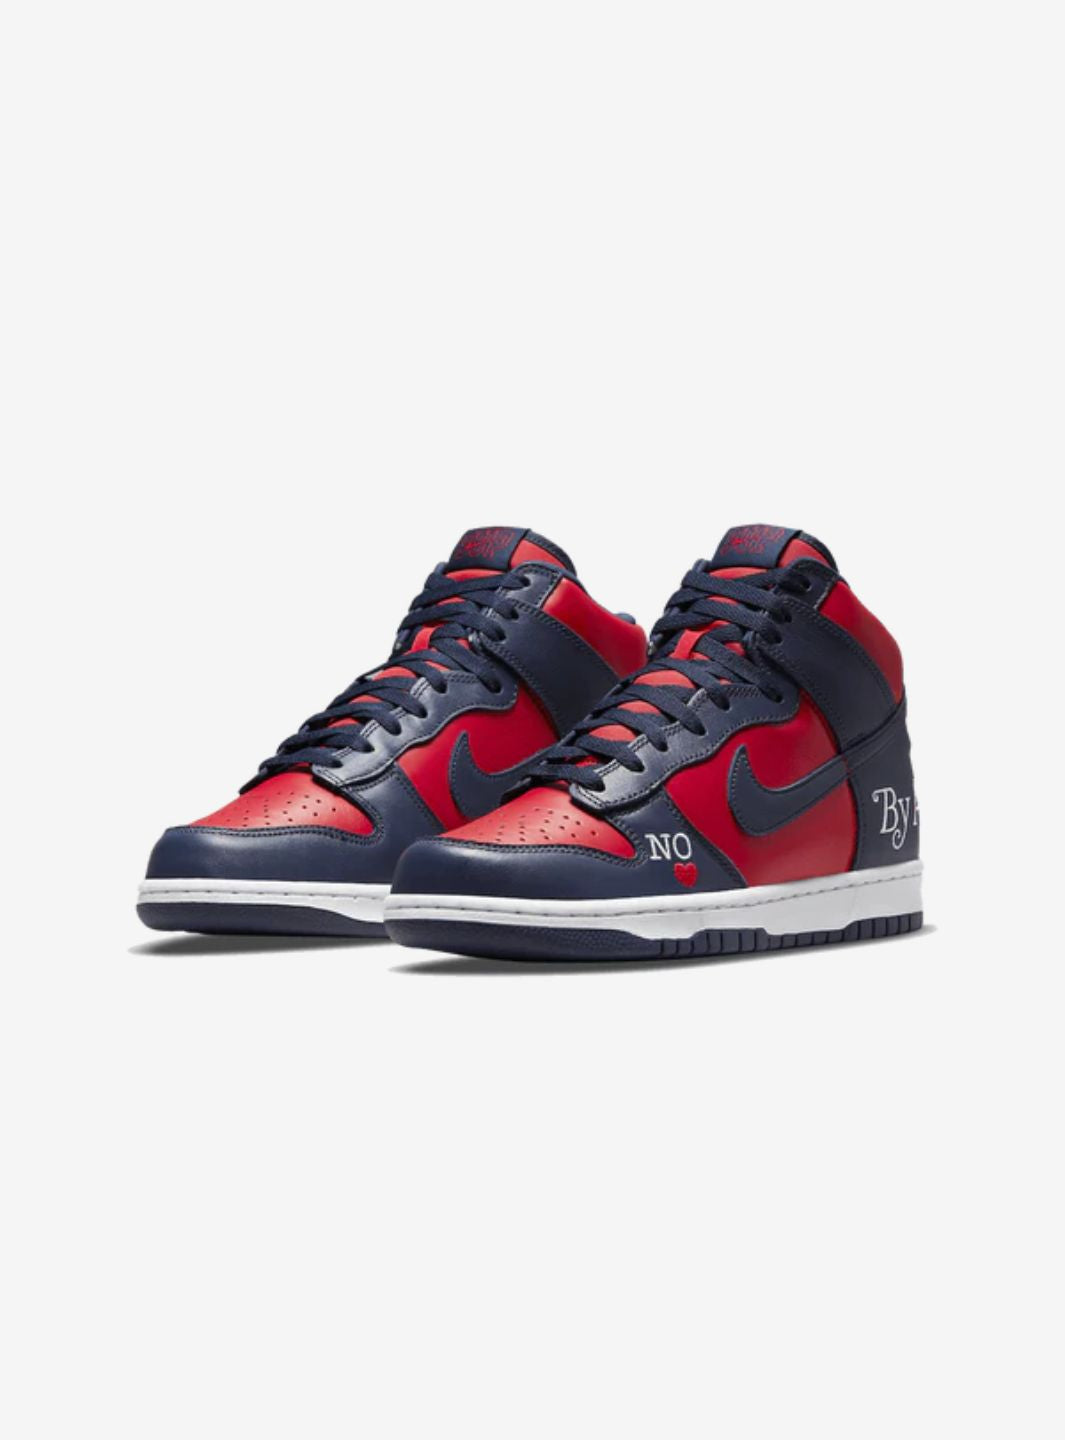 Nike SB Dunk High Supreme By Any Means Navy - DN3741-600 | ResellZone